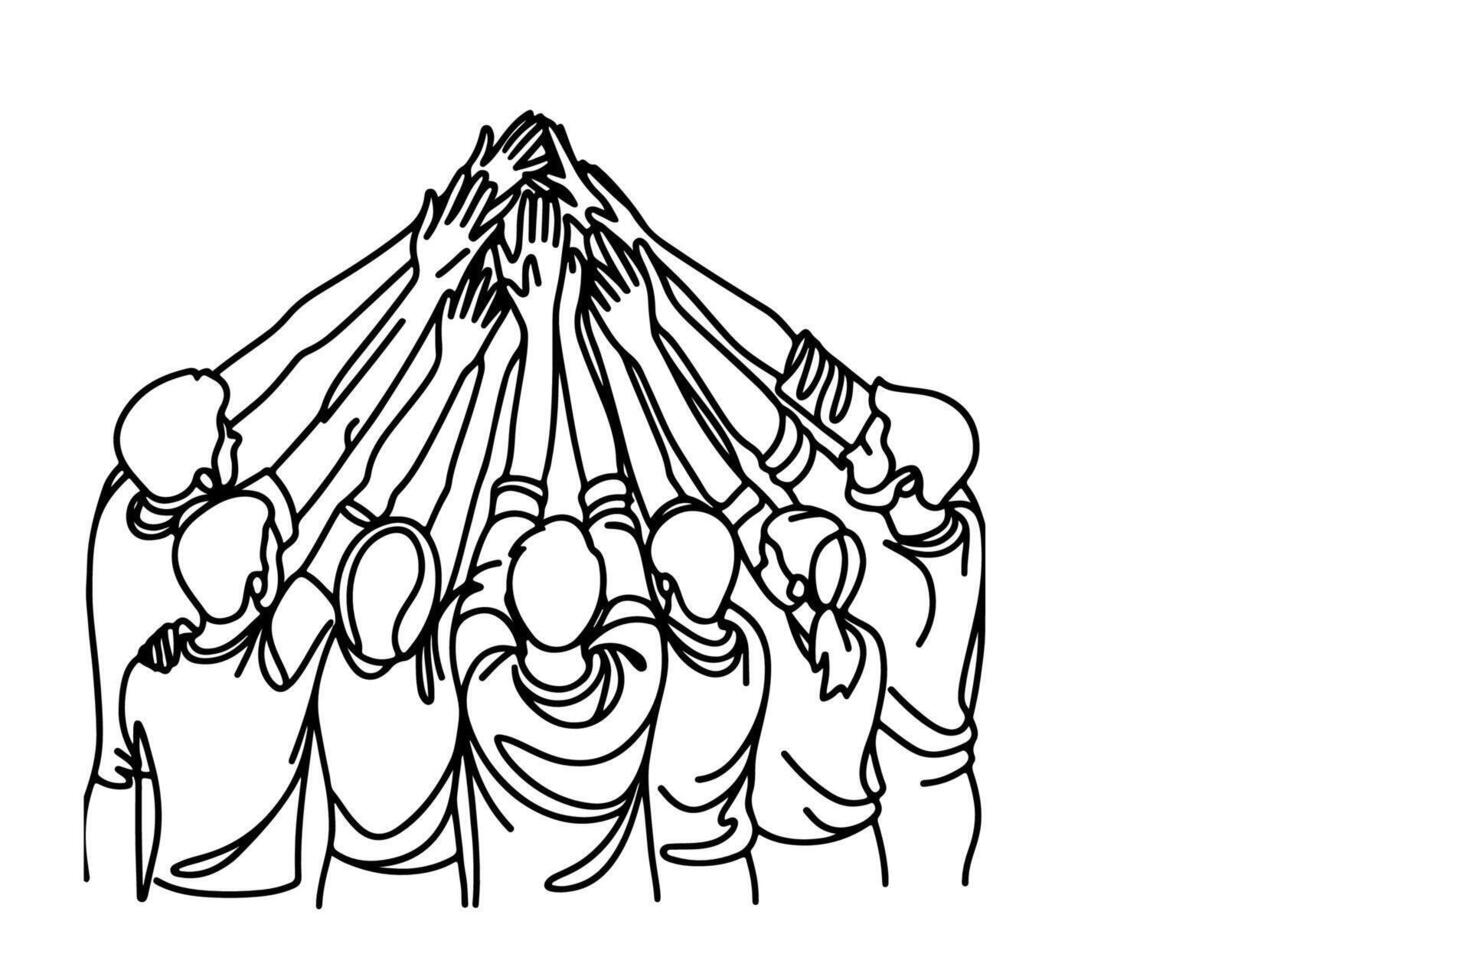 continuous one single black line drawing teamwork group of friends put their hands together illustration isolated on white background vector